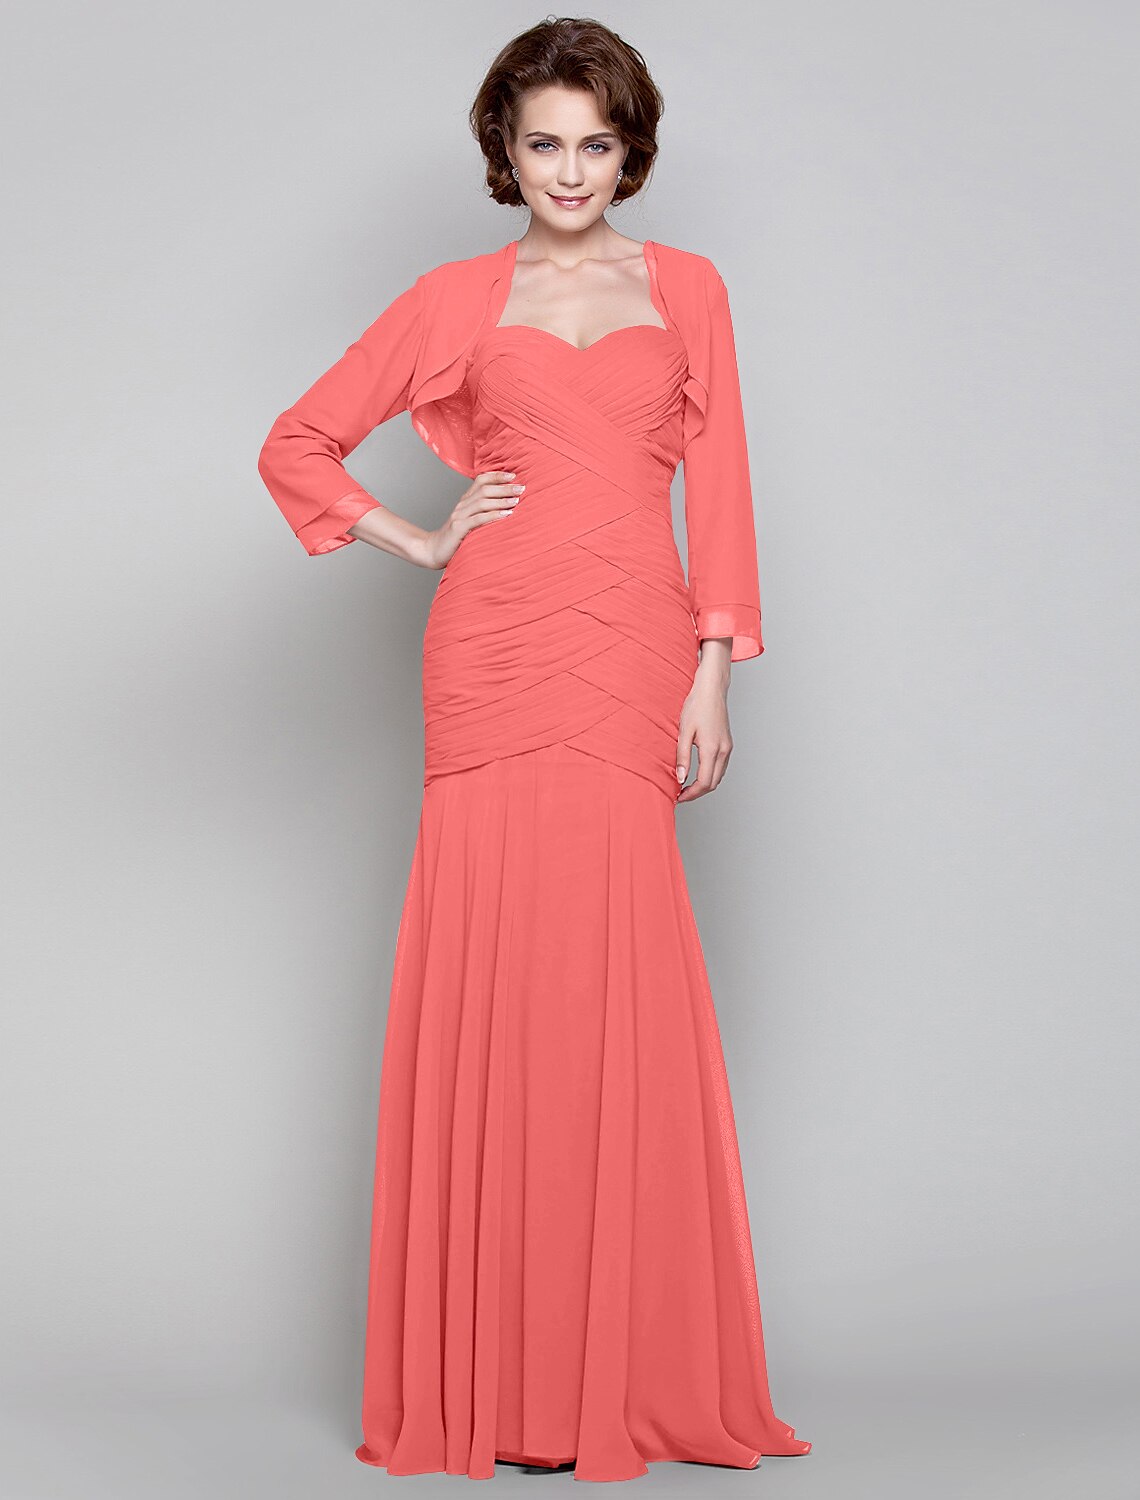 Mermaid / Trumpet Mother of the Bride Dress Two Piece Sweetheart Floor Length Chiffon Long Sleeve with Criss Cross